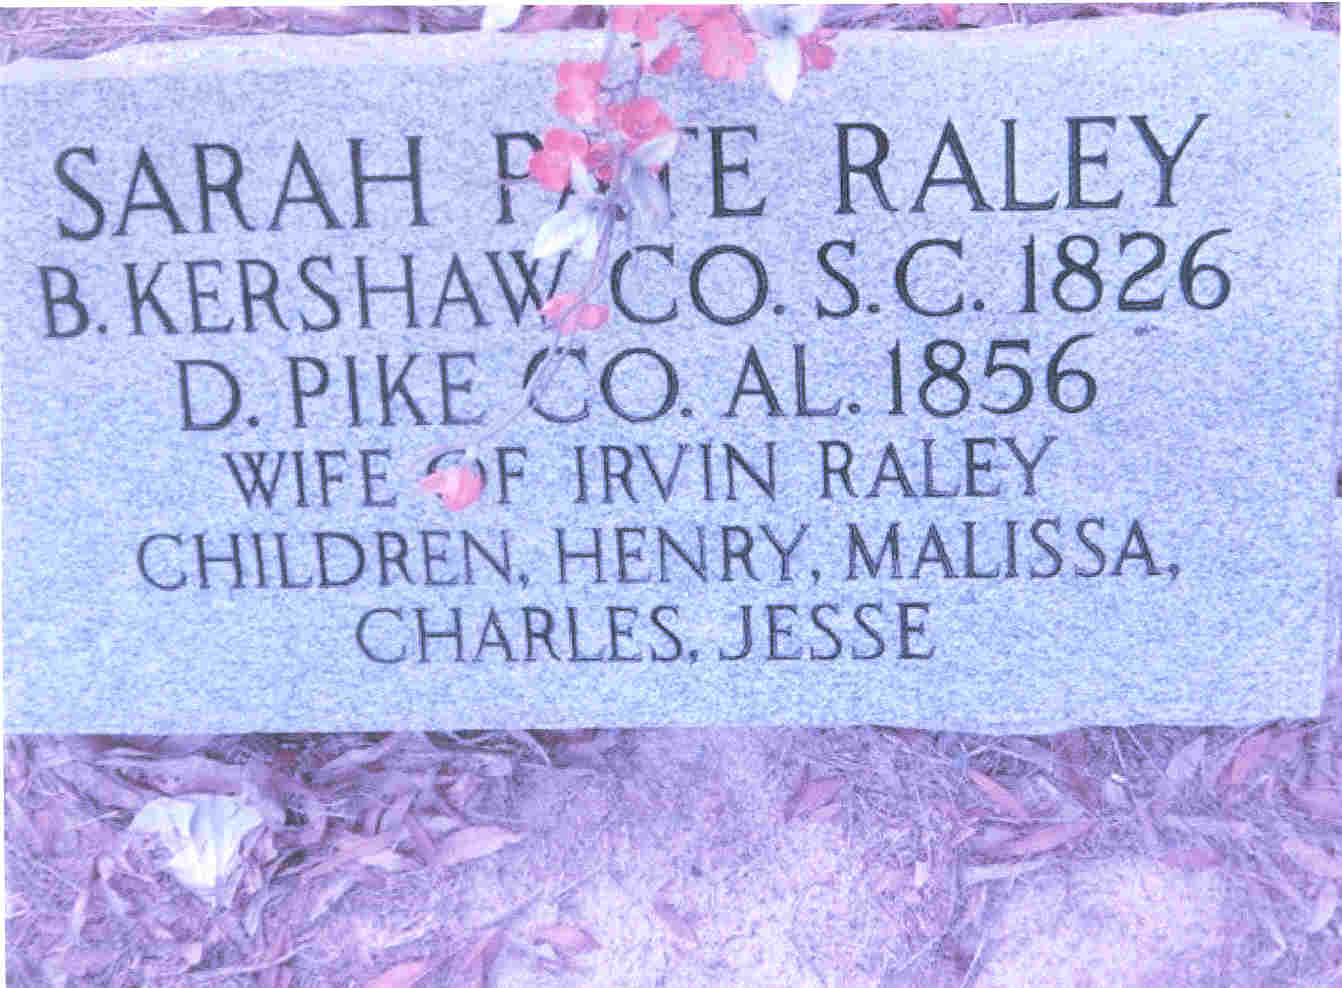 Sarah Pate Raley of Wife Ervin Raley 1826-1856